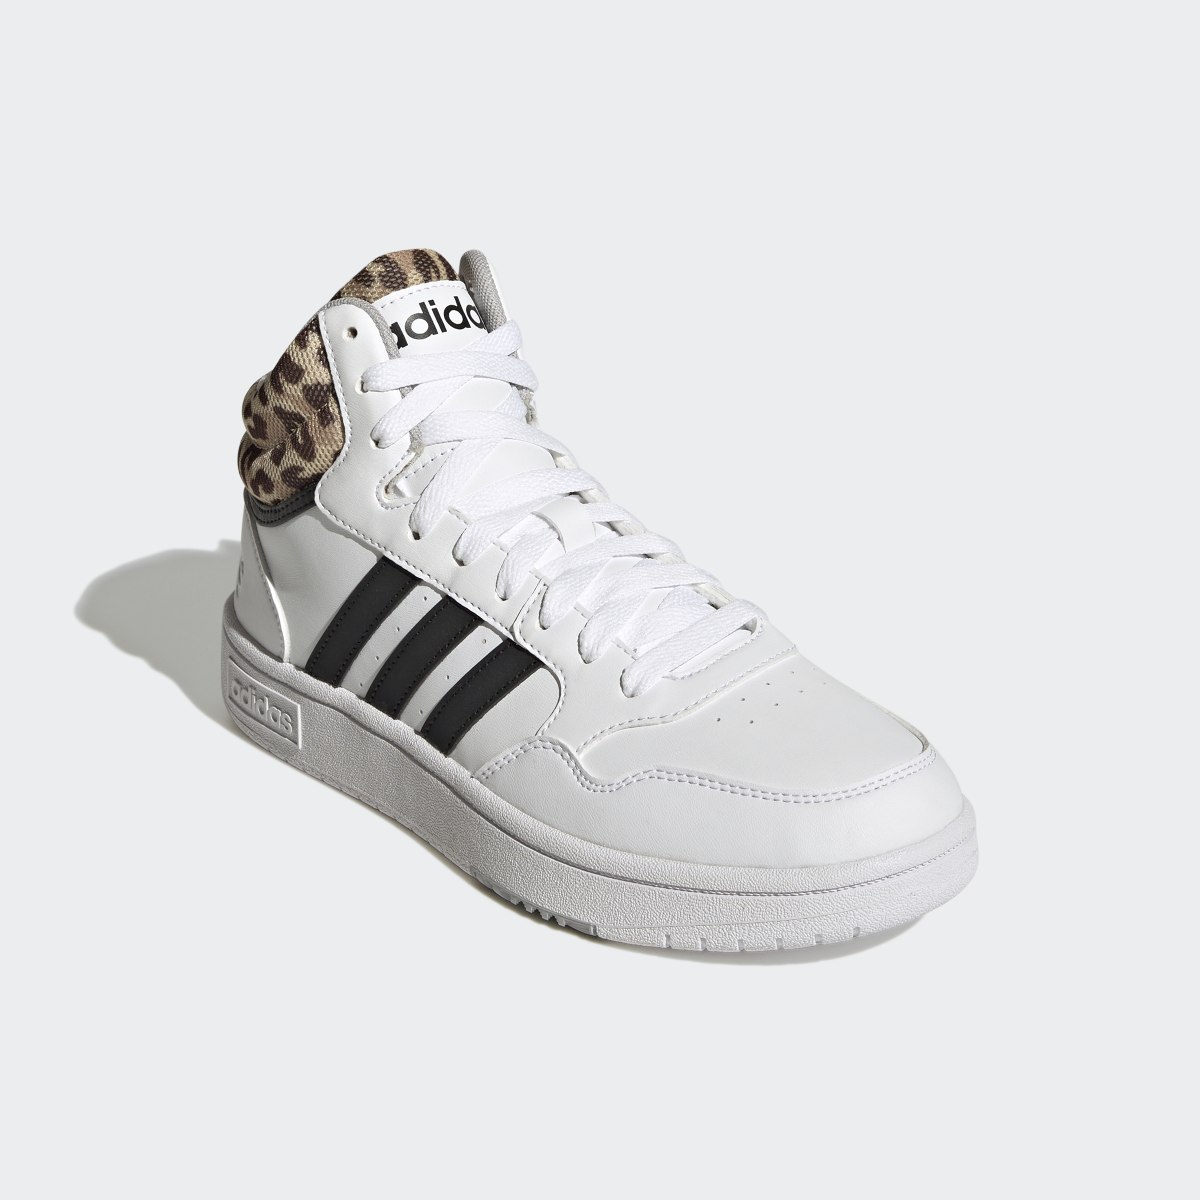 Adidas Hoops 3.0 Lifestyle Basketball Mid Classic Shoes. 5